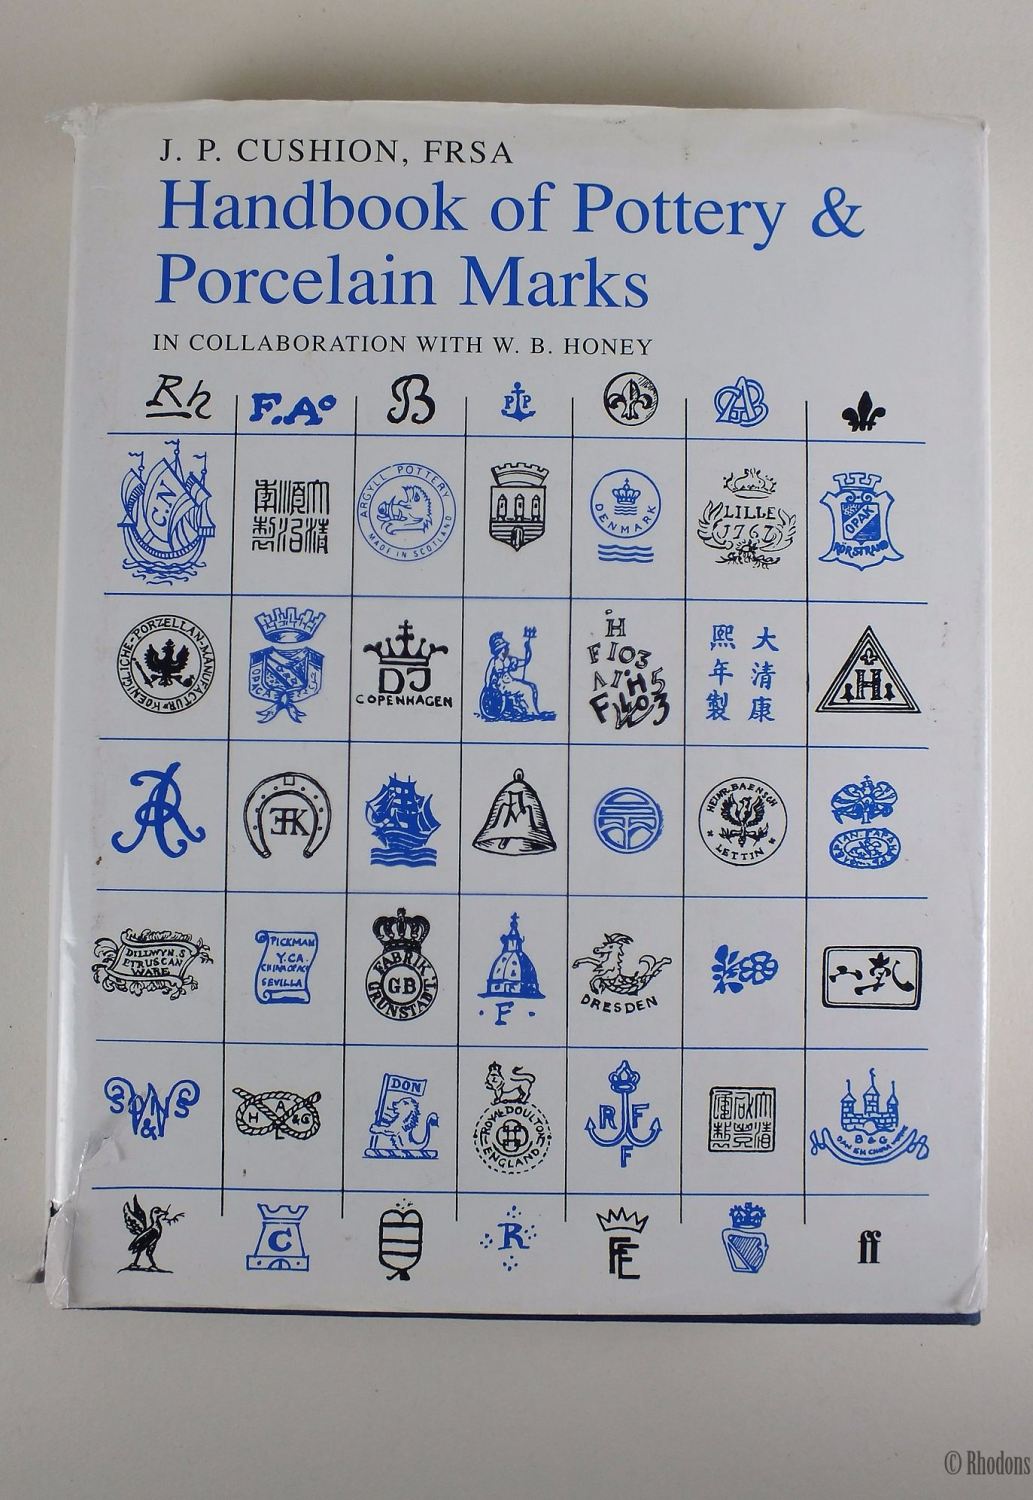 Download Handbook Of Pottery & Porcelain Marks, J P Cushion FRSA (1996 5th Edition, Revised & Expanded ...